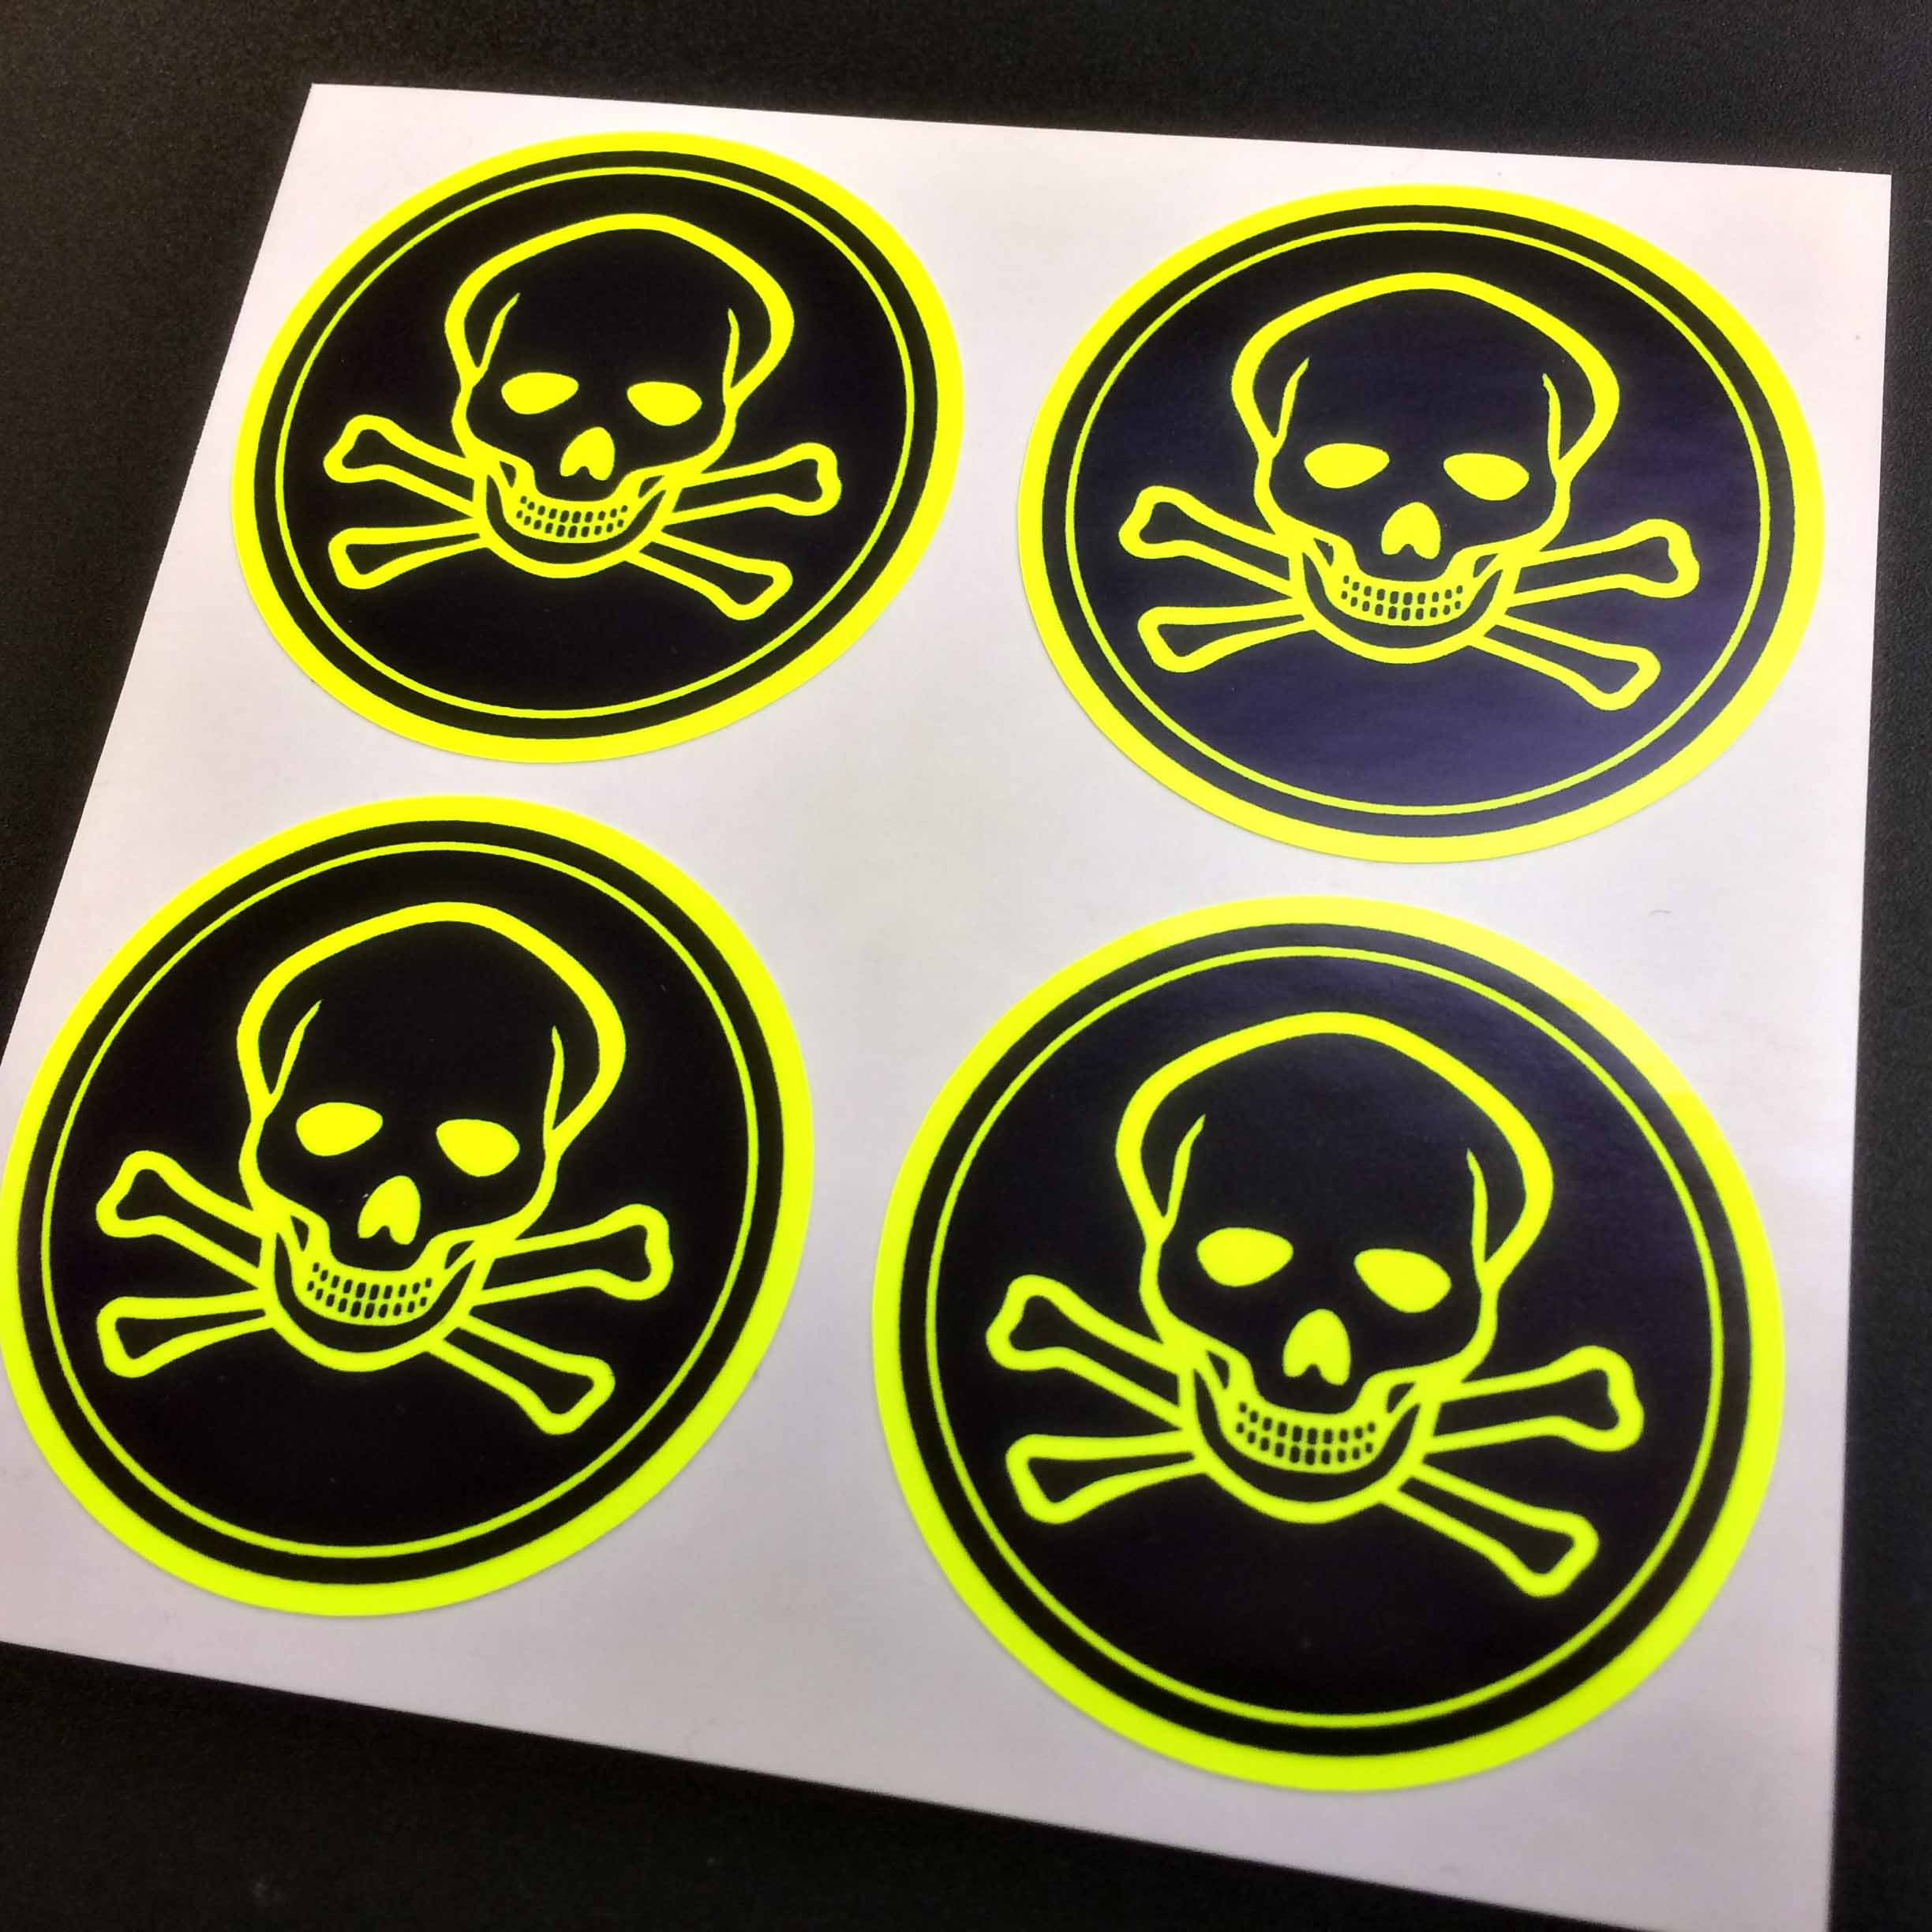 FLUORESCENT SKULL AND CROSSBONES STICKERS. A fluorescent yellow skull and crossbones on a black sticker bordered in fluorescent yellow.